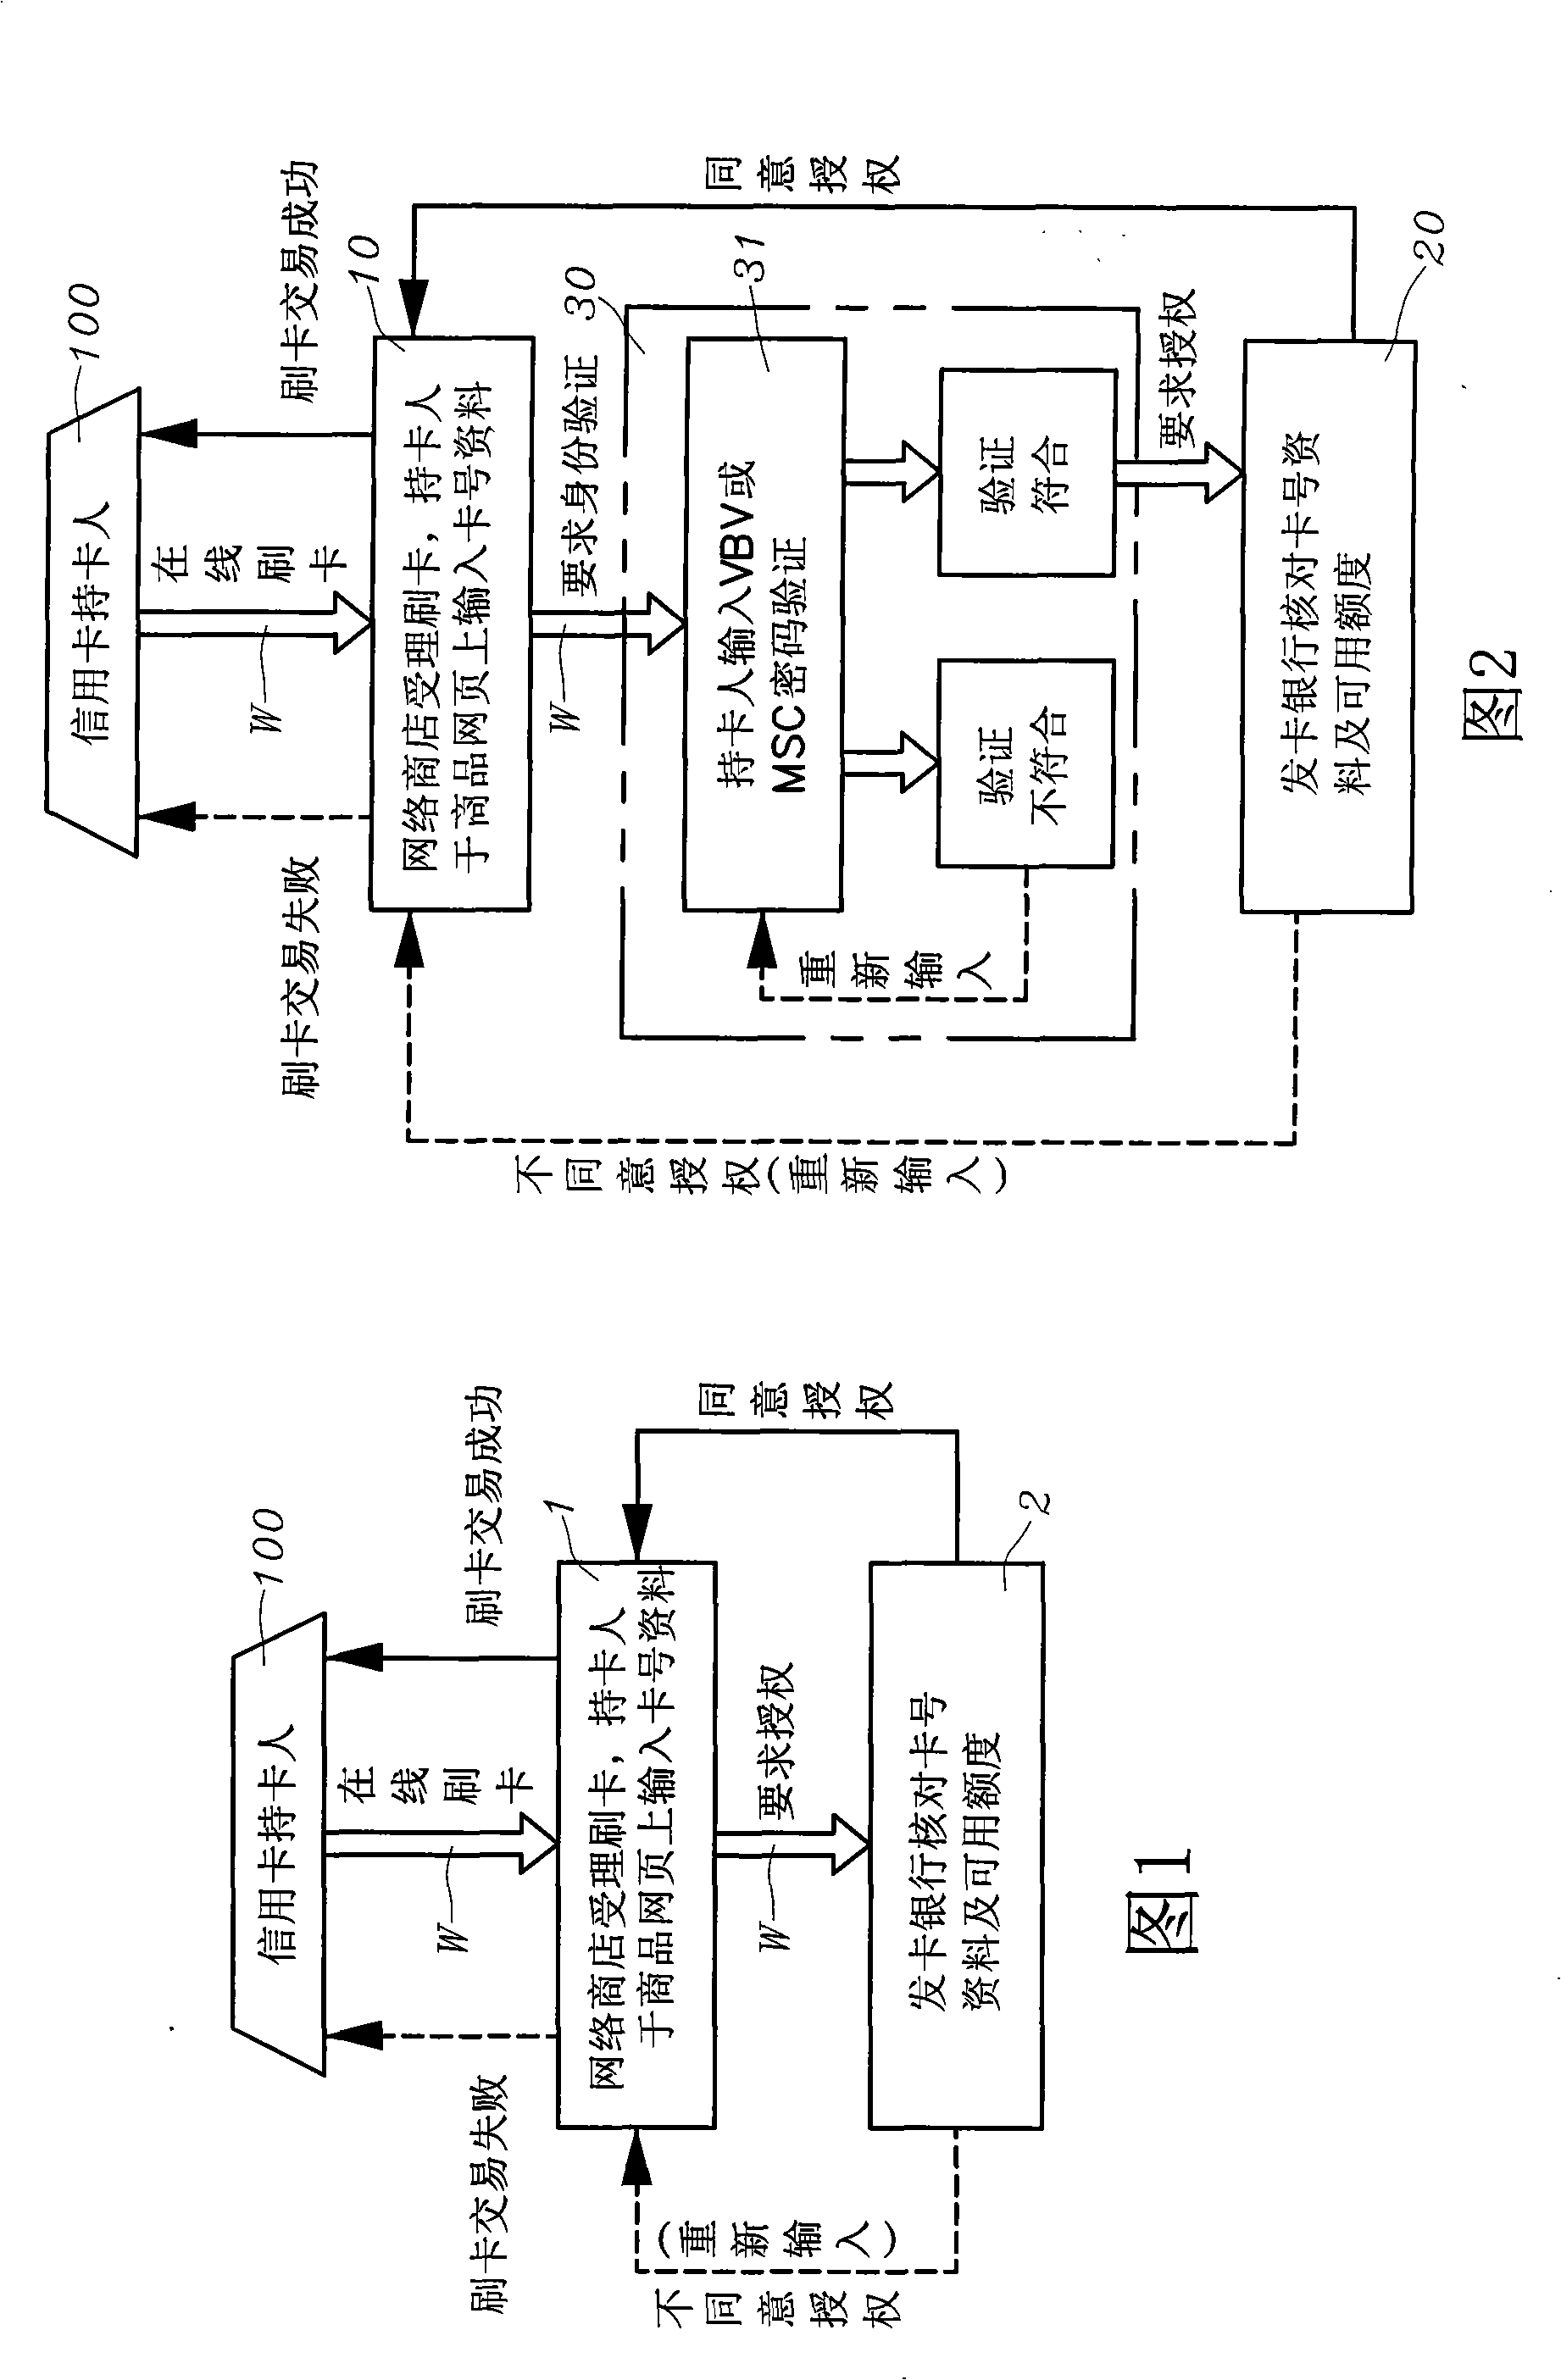 Method for network on-line payment double authentication by telephone and identifying card